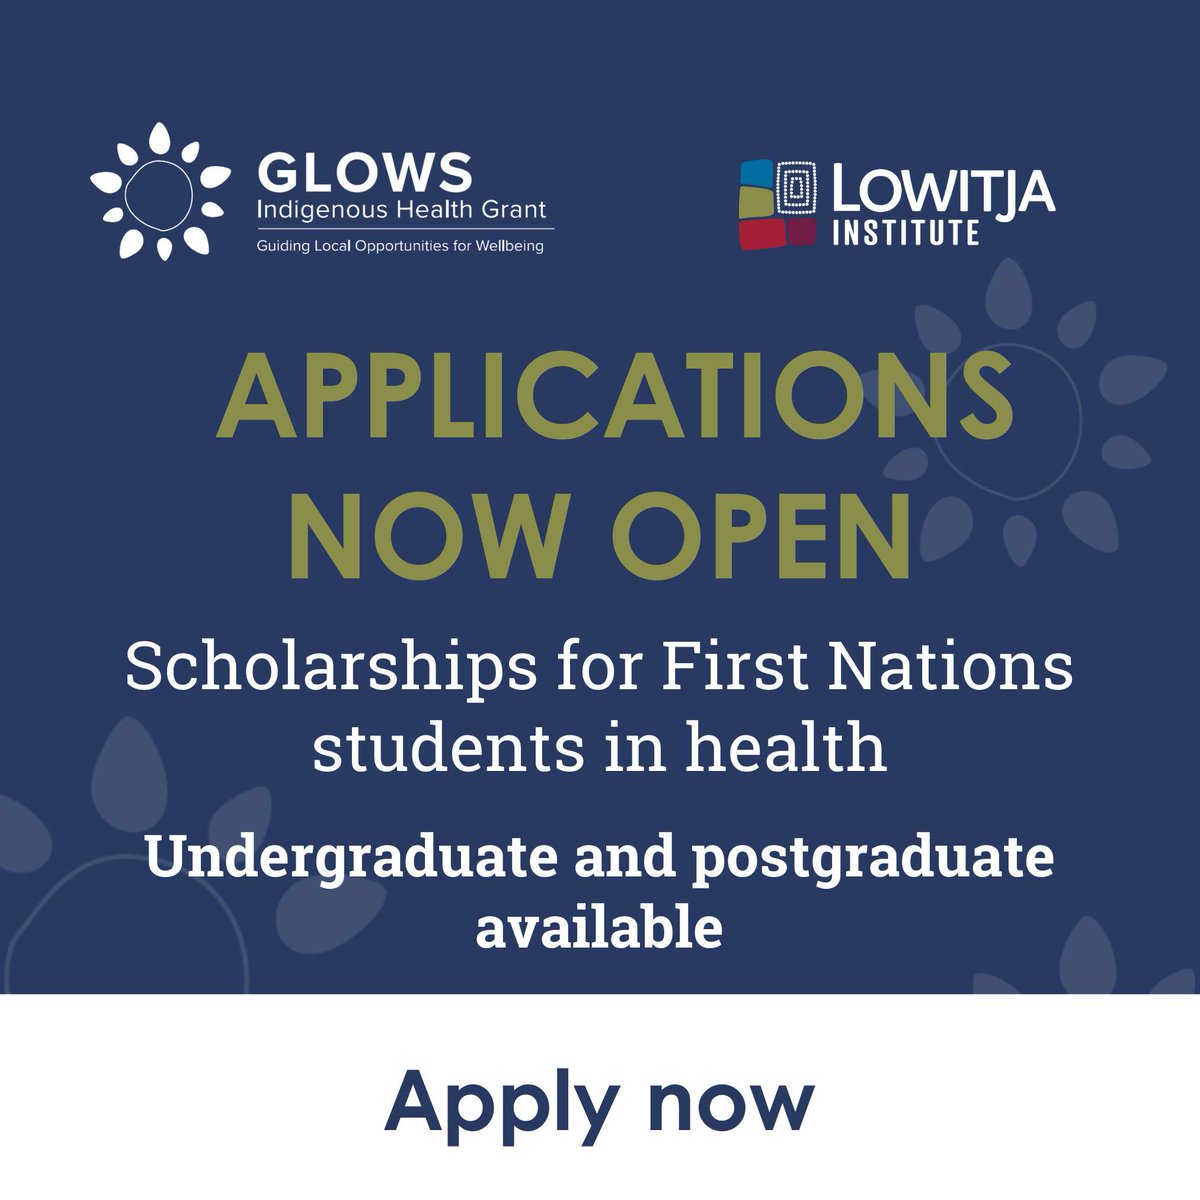 Applications are now open for Round 1 of the GLOWS Scholarships across two streams. Learn more and apply: lowitja.org.au/.../glows-gran… #Scholarships #Health #HIV #AboriginalandTorresStraitIslander #Communities